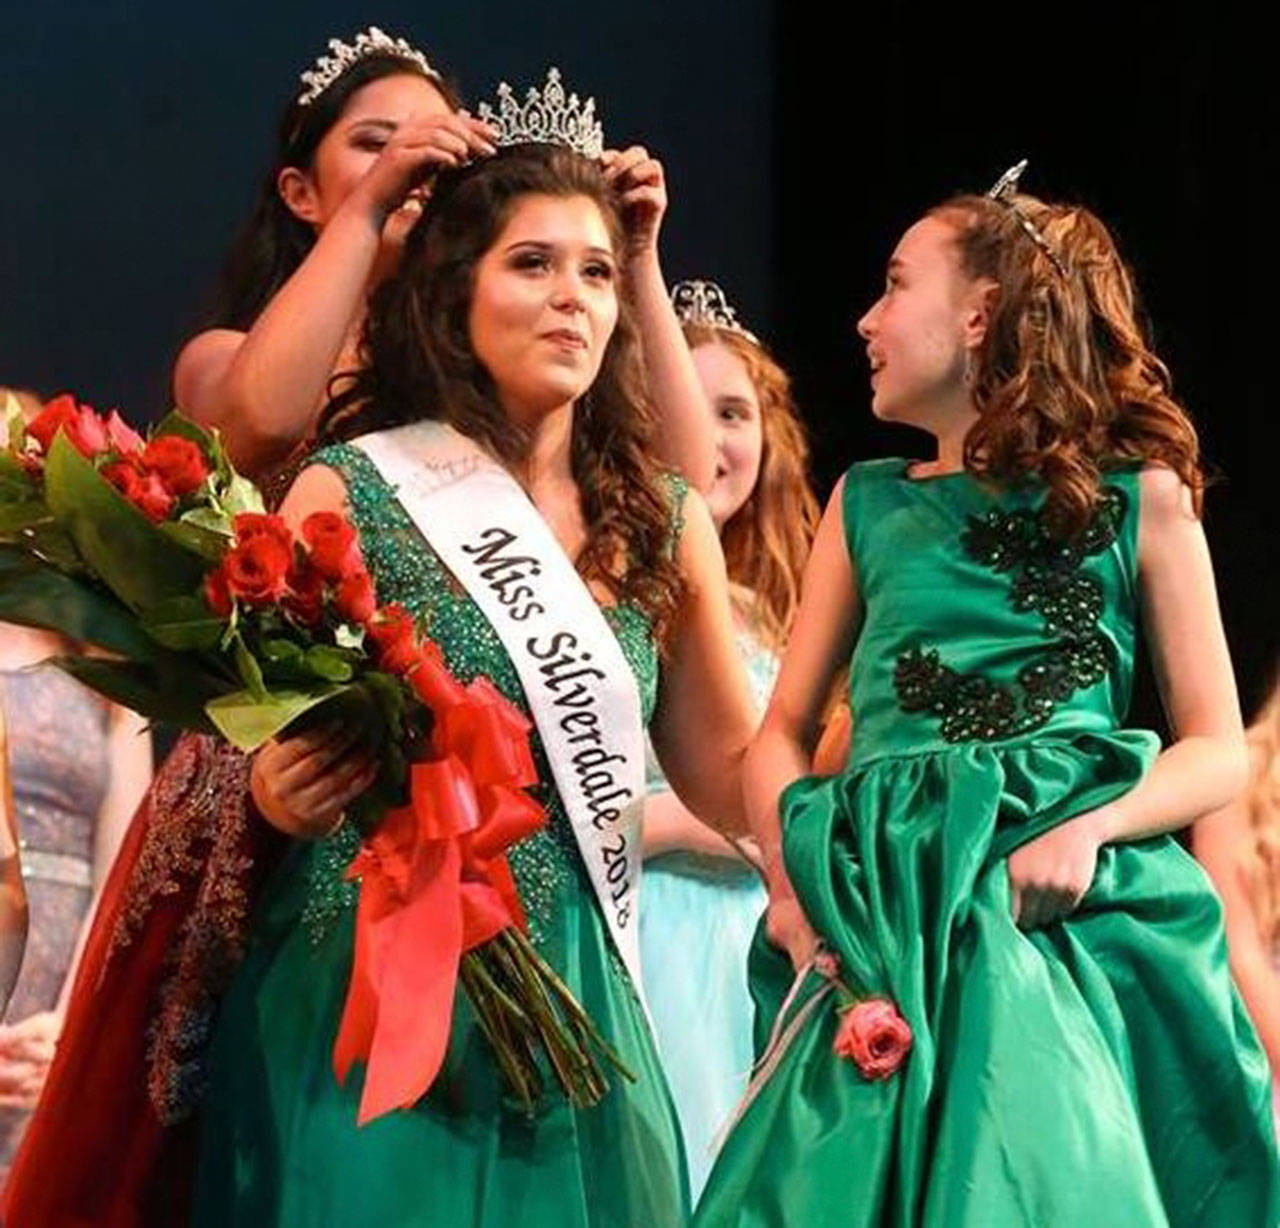 Miss Silverdale 2017 Colby Conde crowns Emily Rider while her pageant Little Sister Mia Coombe looks on.                                Jesse Beals/Olympic Photo Group